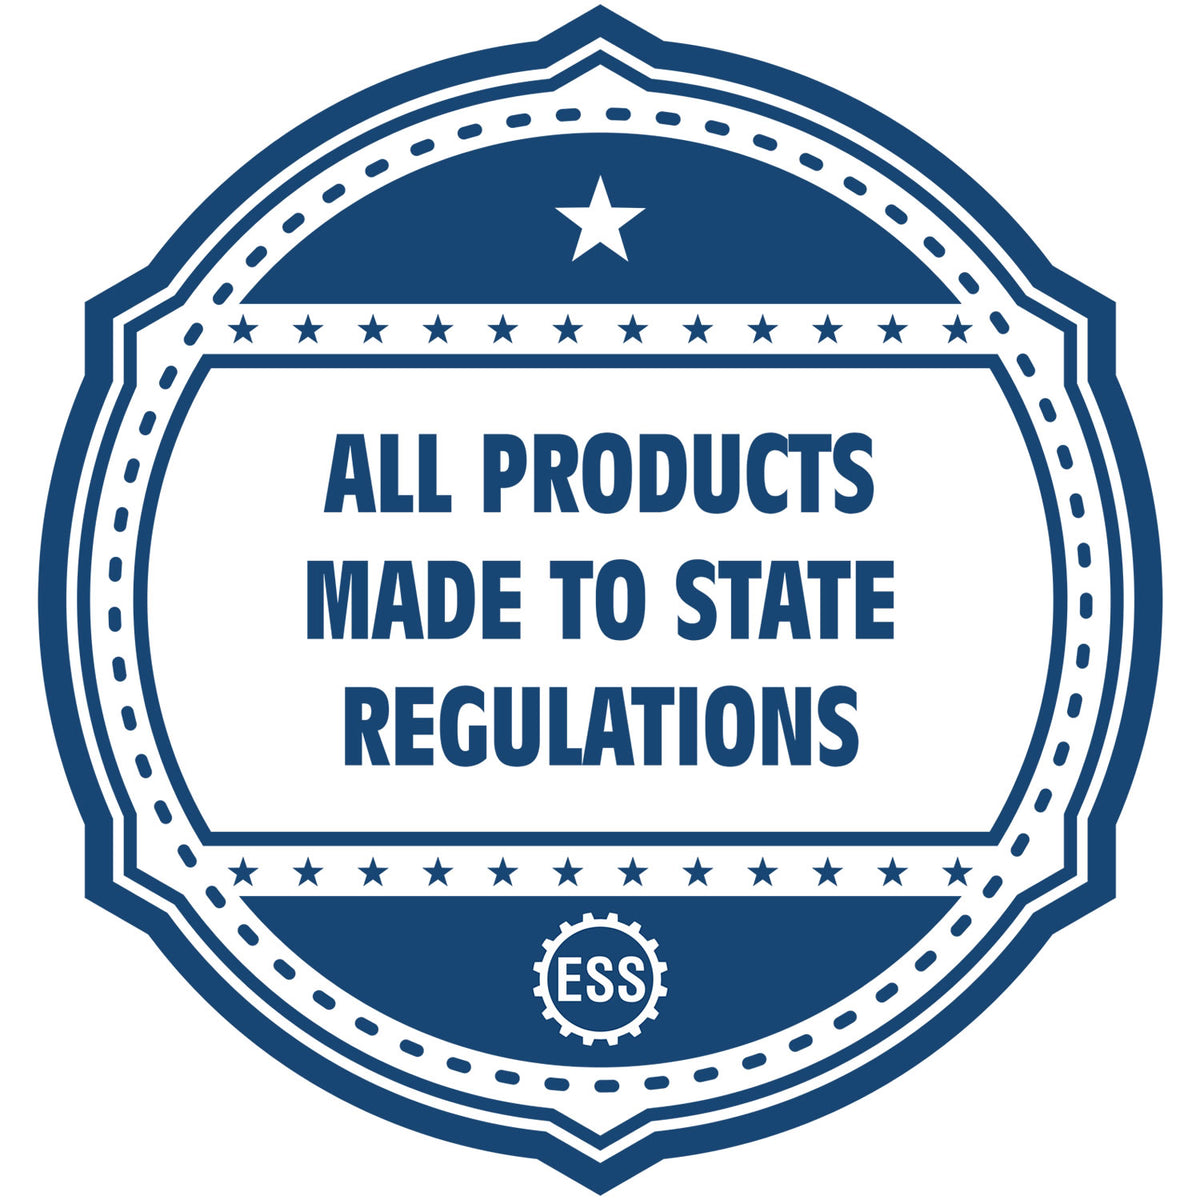 An icon or badge element for the Heavy-Duty New Mexico Rectangular Notary Stamp showing that this product is made in compliance with state regulations.